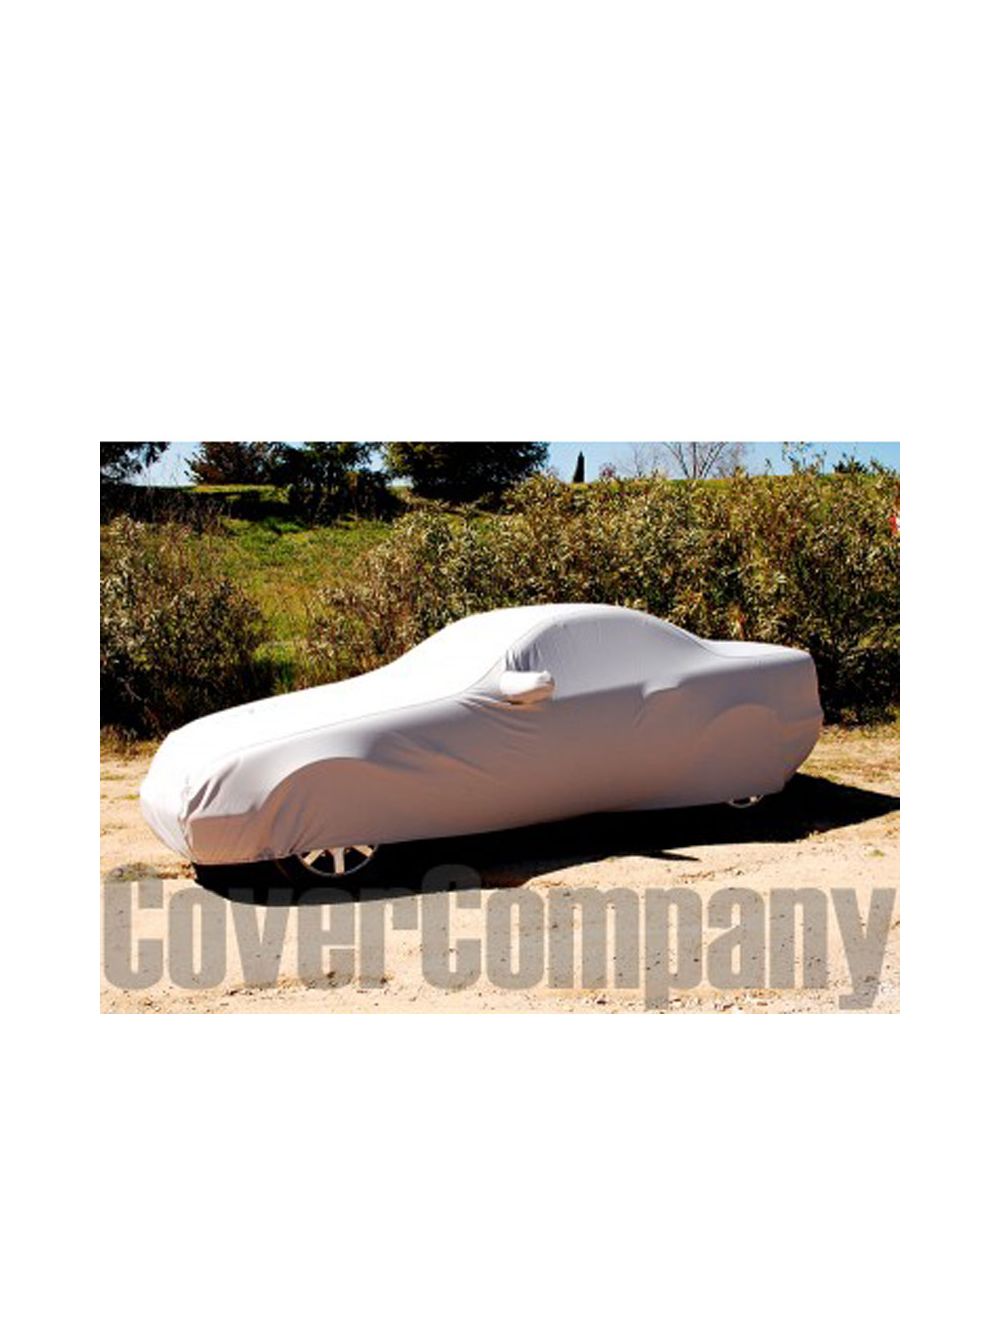 For Mercedes-Benz B-CLASS auto hail proof protective cover,snow